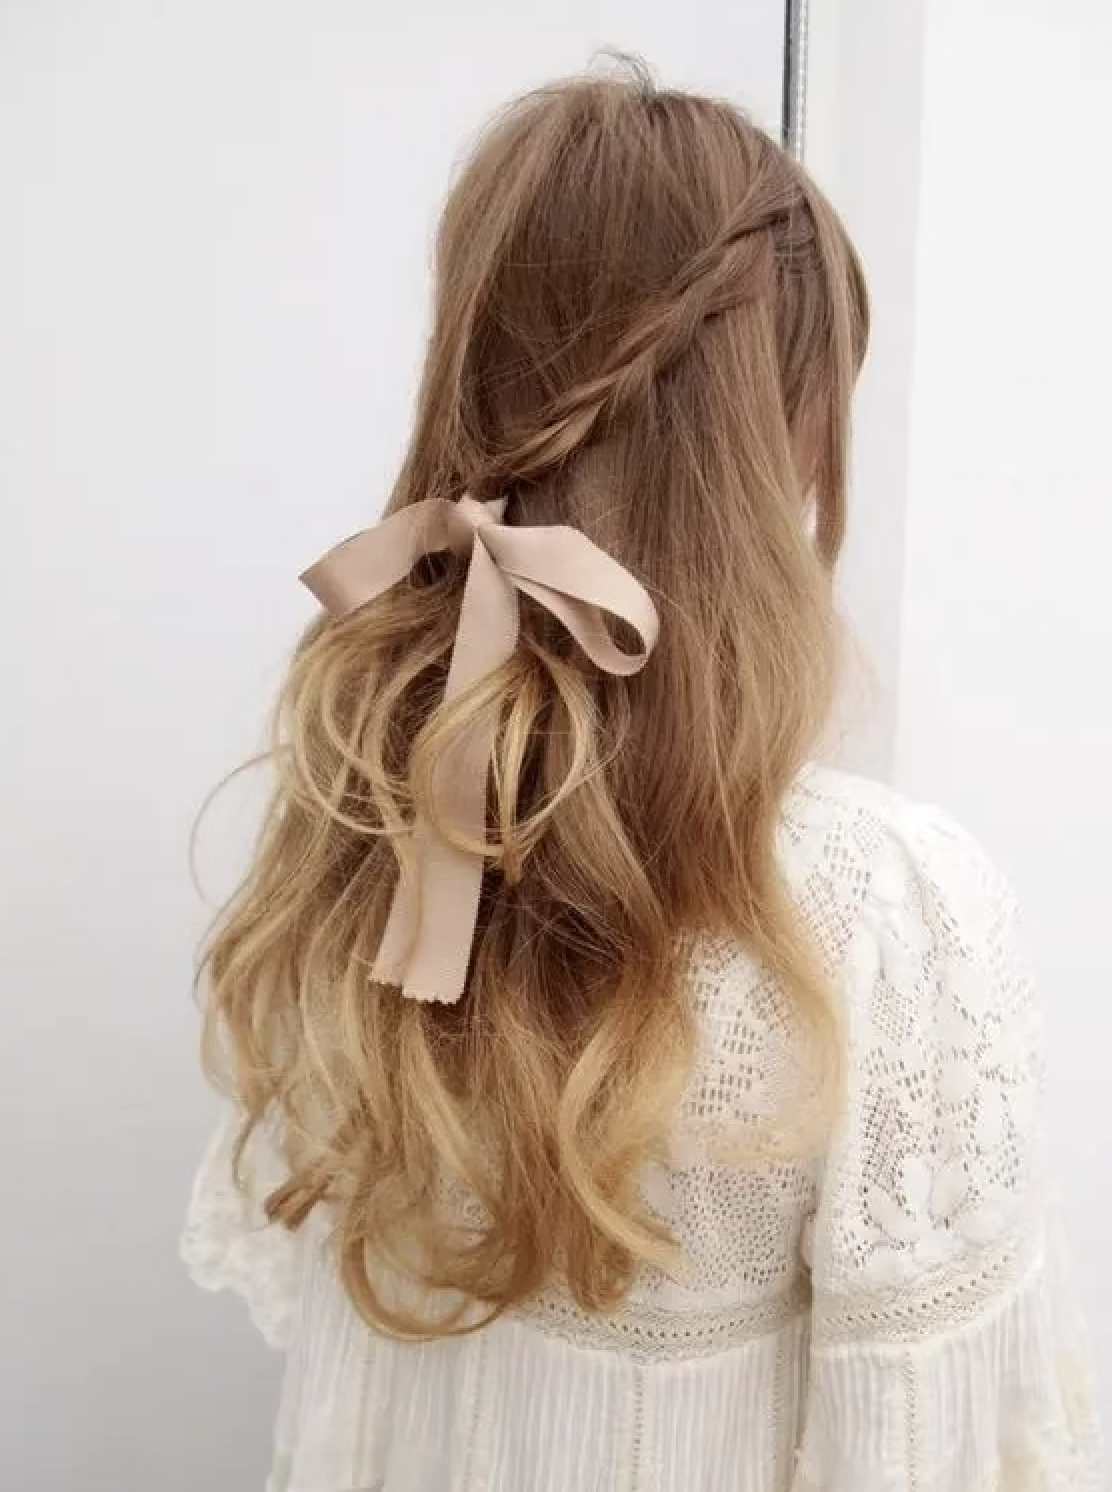 Celebrities Love Wearing Hairstyles With Hair Bows